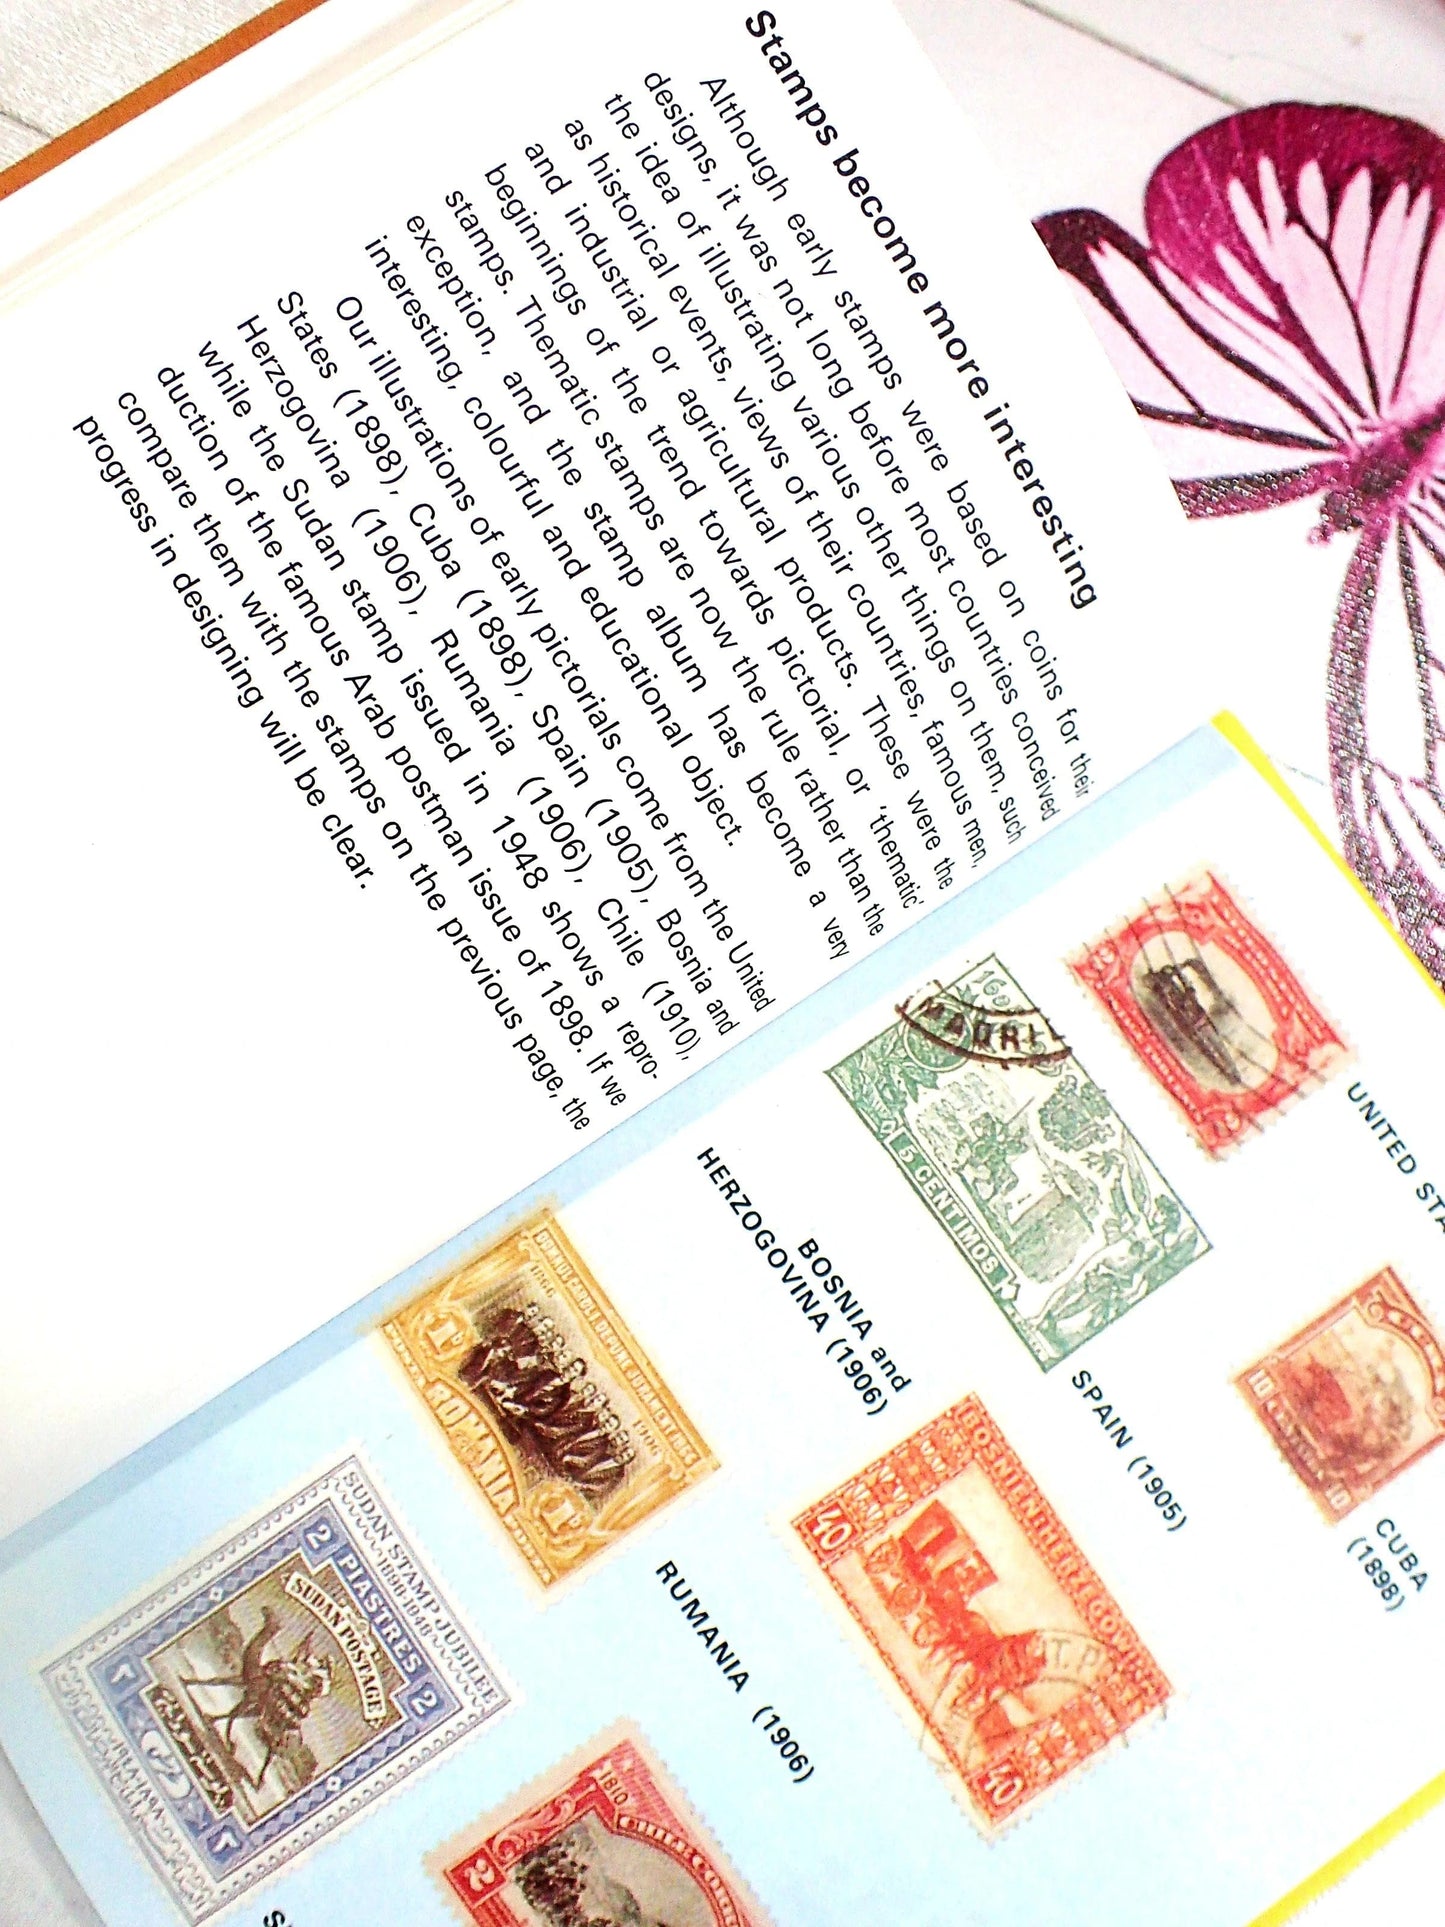 Stamps become more interesting, pictorial and foreign stamps. 